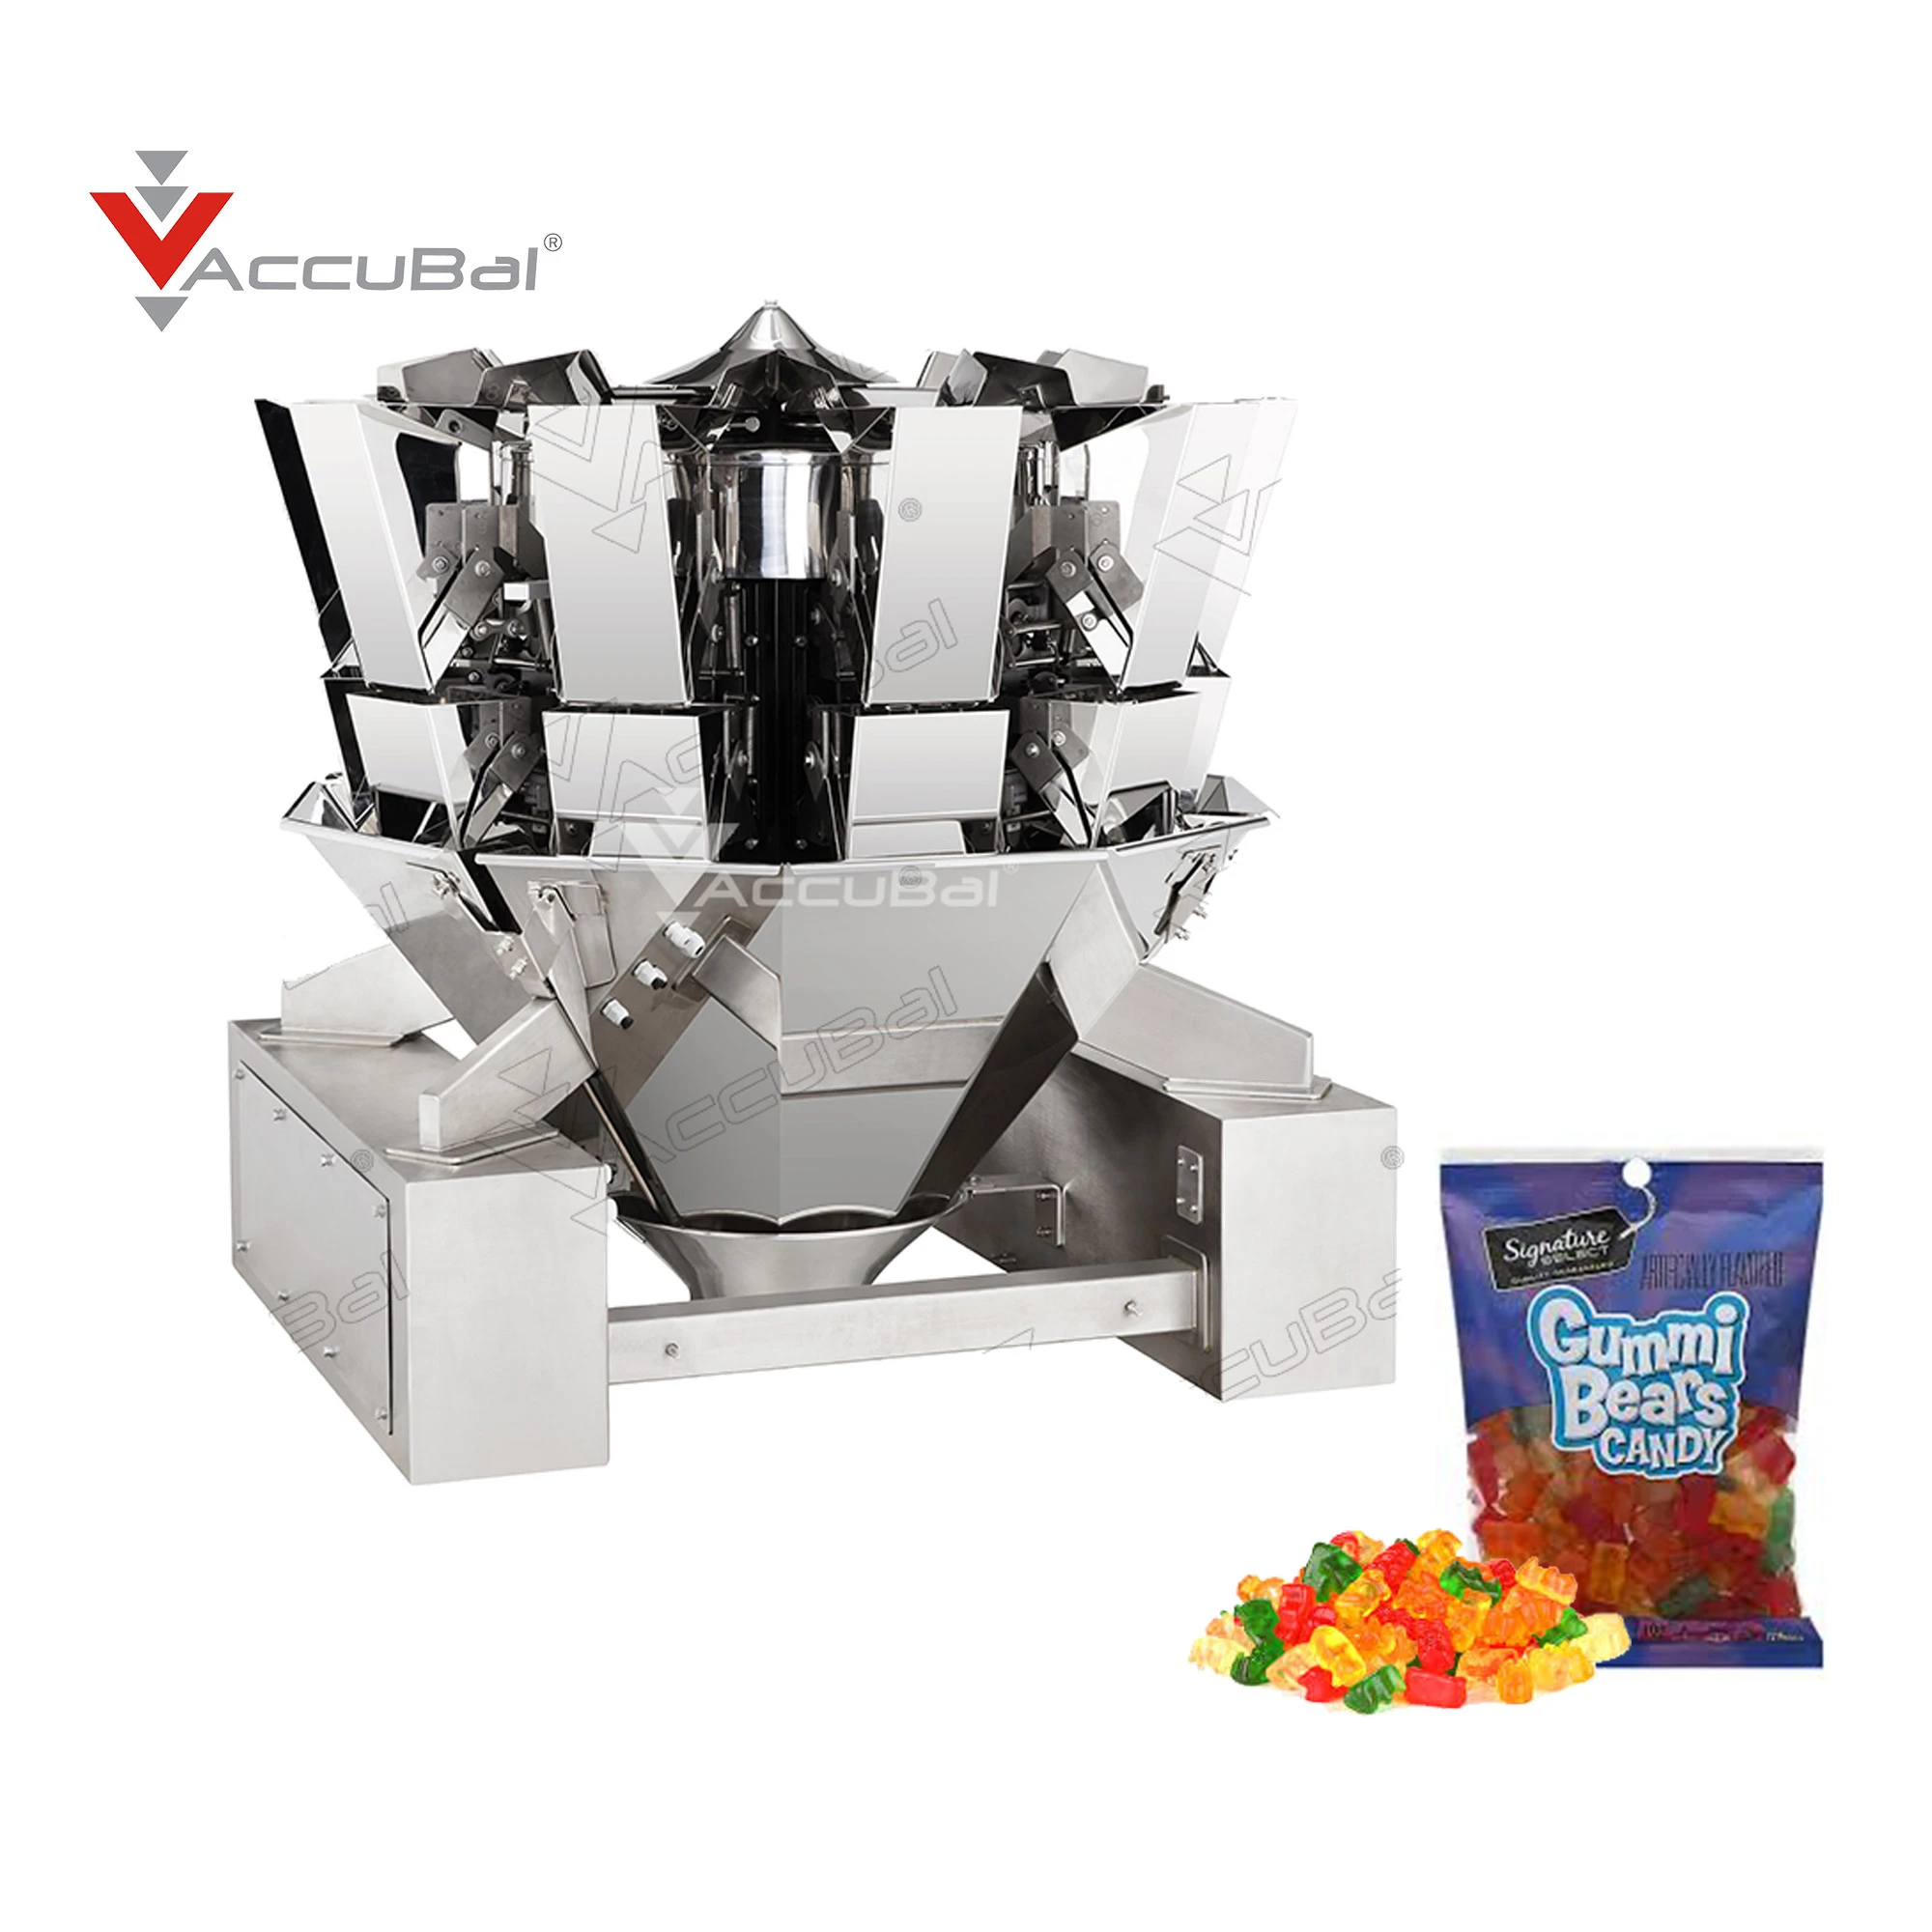 Accubal 10 head 1.6L standard model  multihead weigher for nut,snack